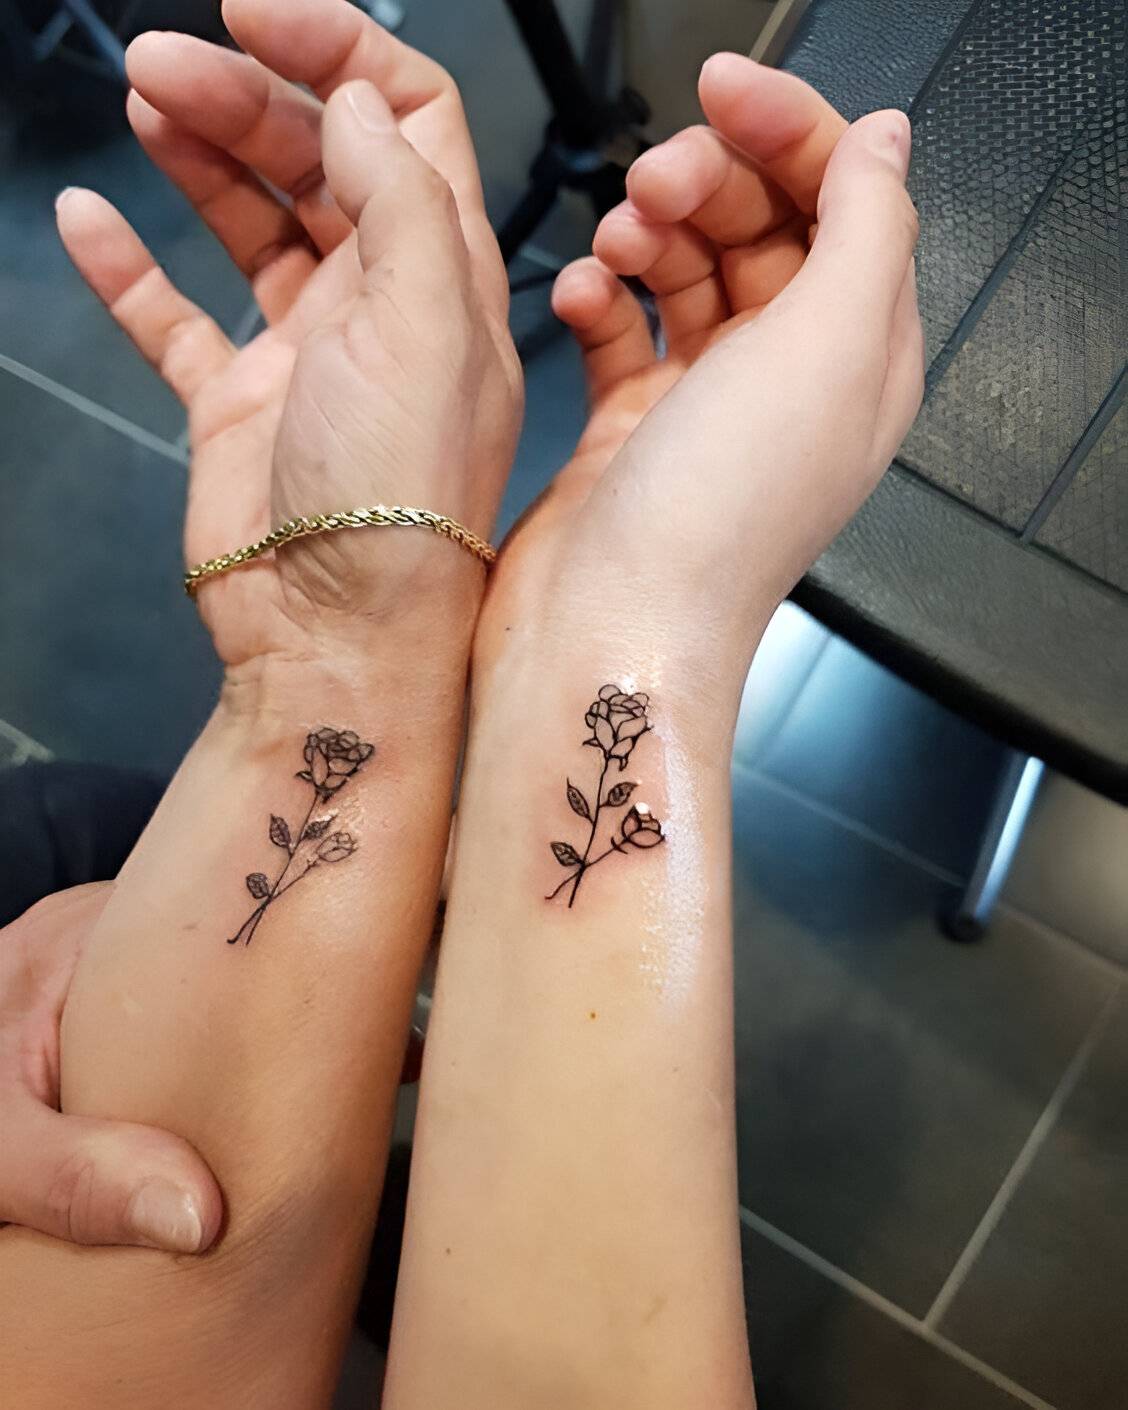 27 Feminine Best Friend Tattoos With The Perfect Elegant Touch 15